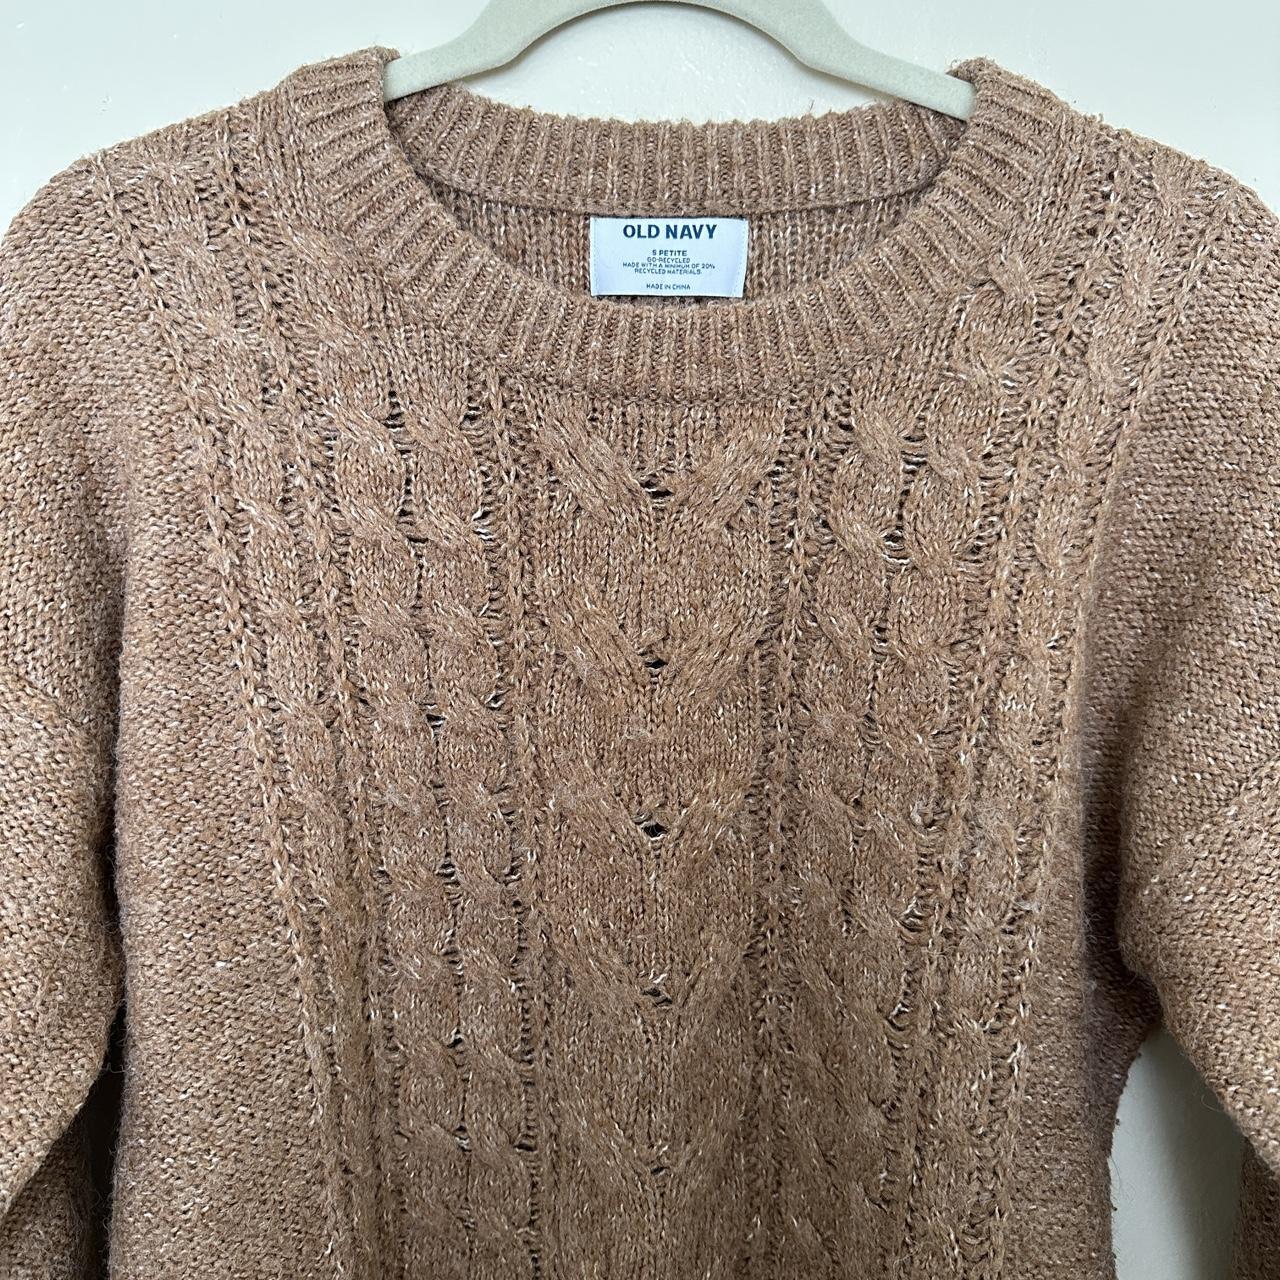 Old navy cable knit sweater size small petite - Depop